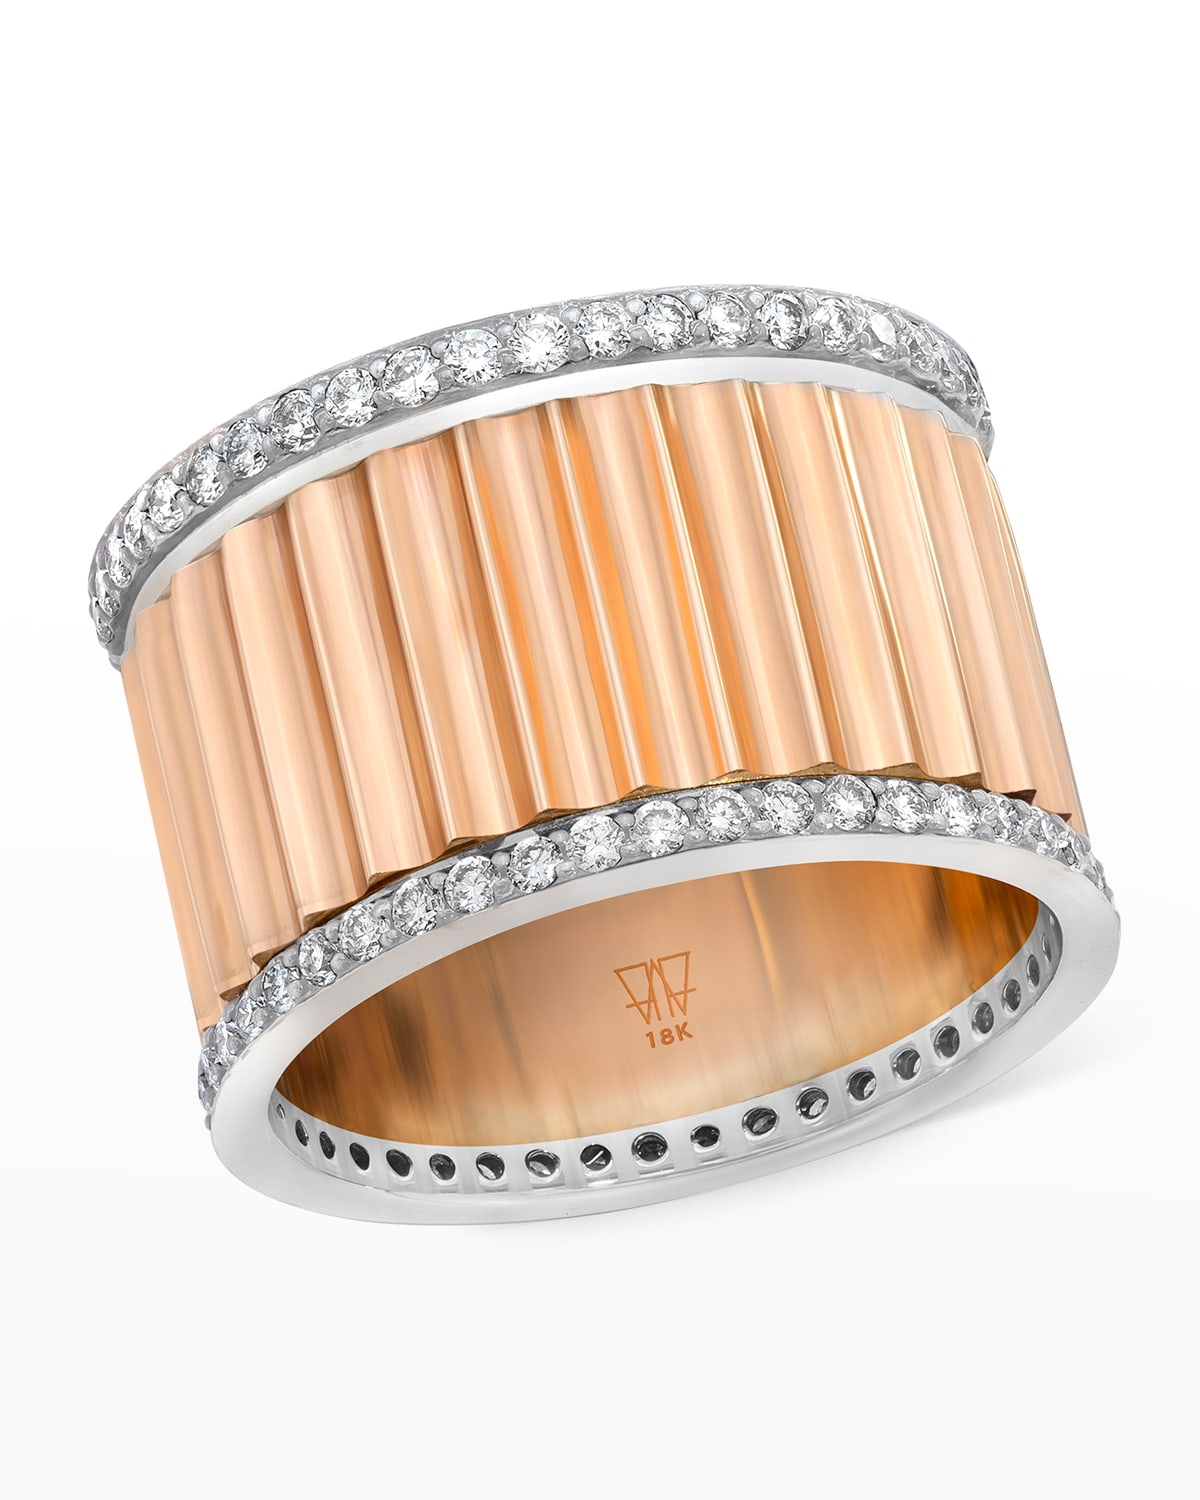 Walters Faith Clive Rose Gold Wide Fluted Band Ring With White Gold And Diamonds